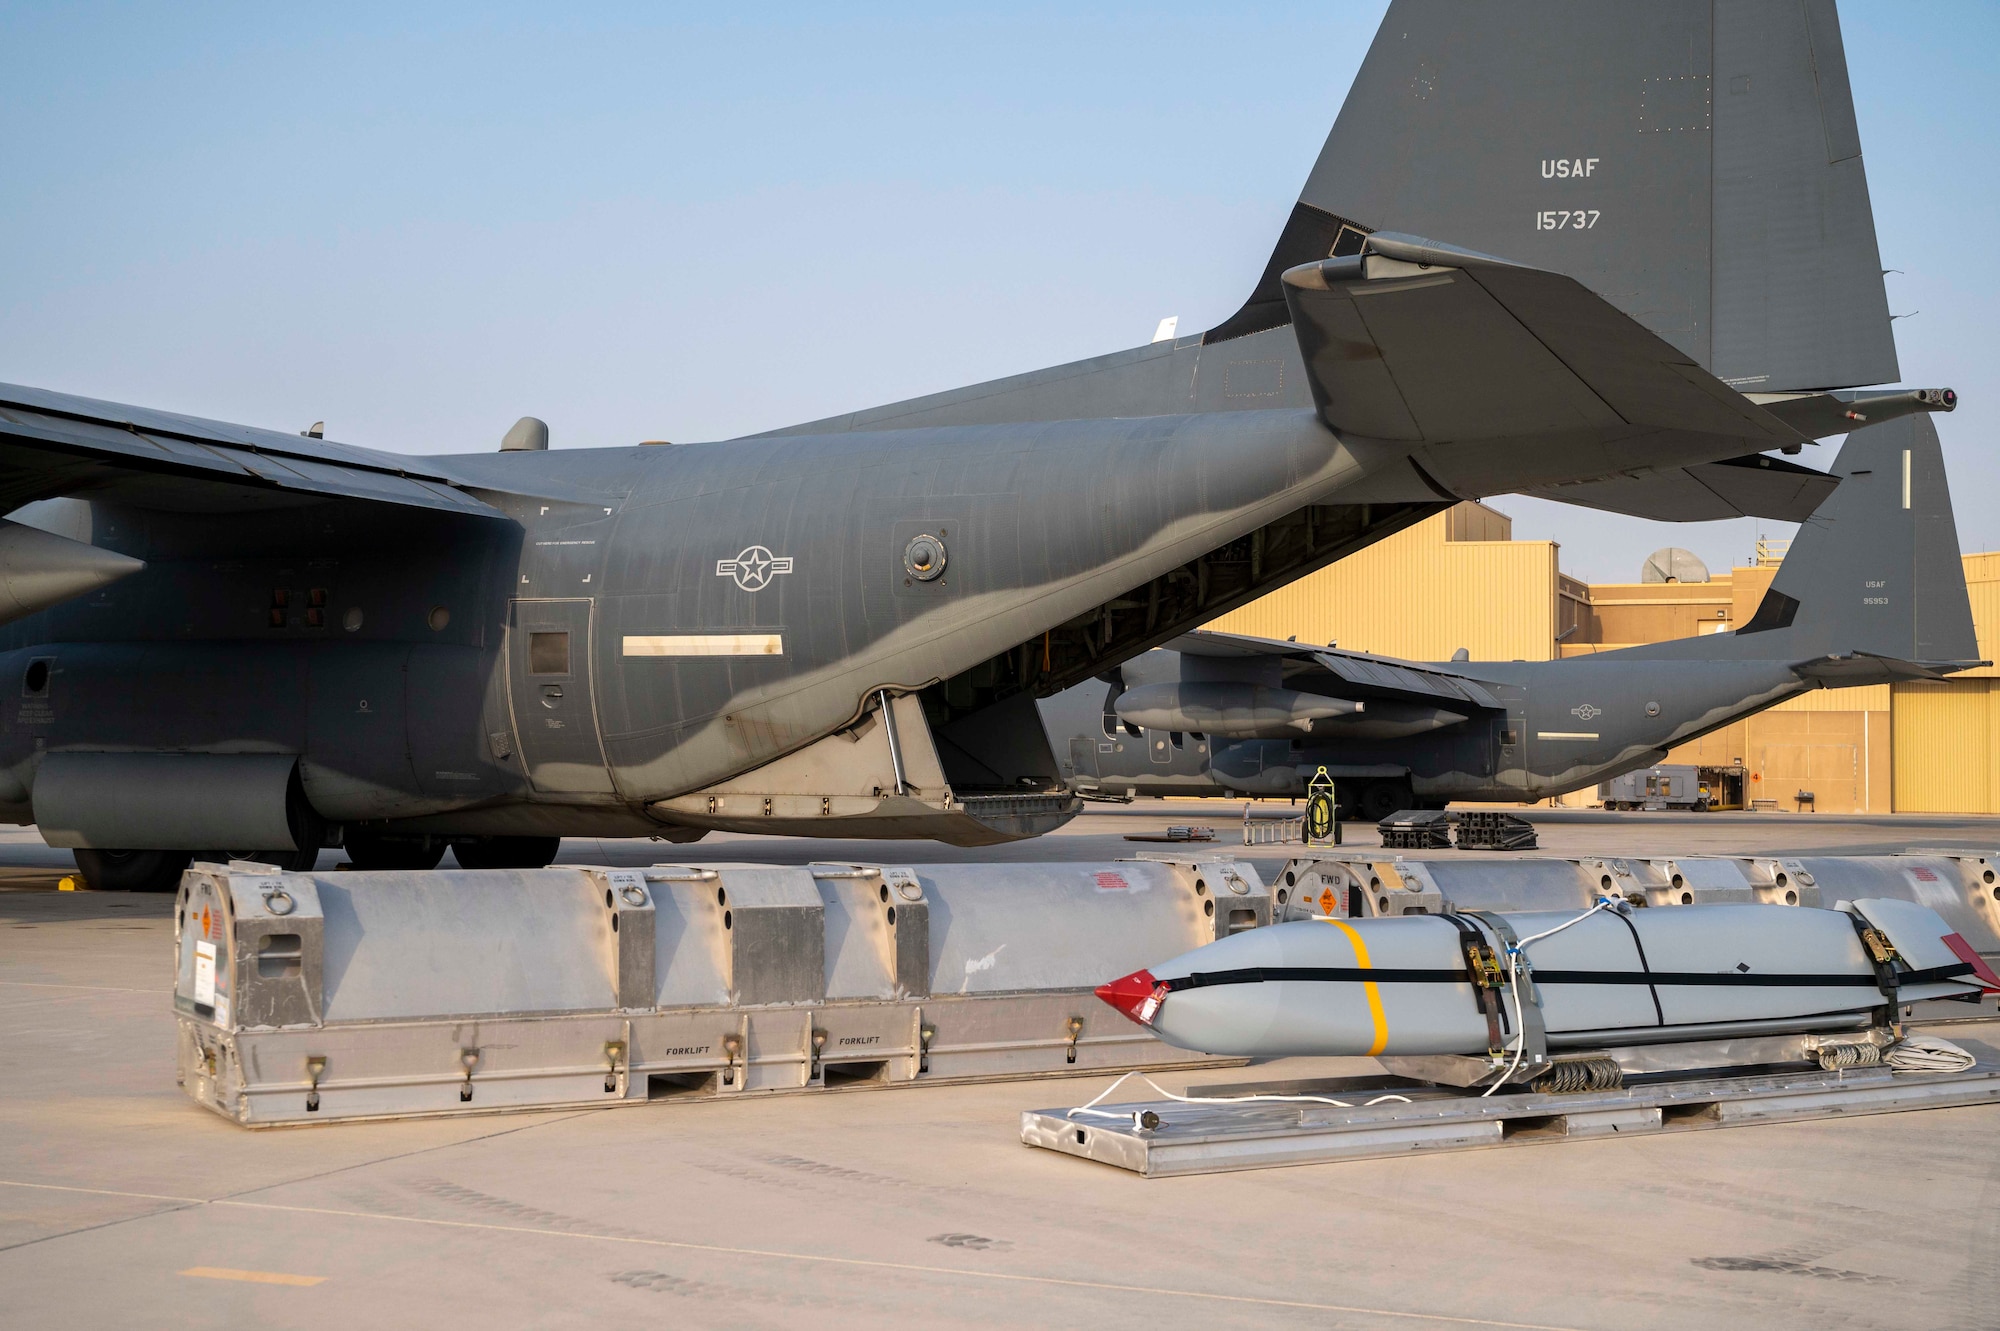 Members of the U.S. Air Force 6th Expeditionary Maintenance Squadron and the 6th Special Operations Tasking Unit demonstrated the MC-130J’s Commando II capability of loading and unloading Joint Air-to-Surface Standoff Missiles (JASSM) at Al Udeid Air Base, Qatar, Aug. 6, 2023. The Rapid Dragon palletized munitions system is capable of deploying long-range cruise missiles using standard airdrop procedures from cargo aircraft like the MC-130J operated by Air Force Special Operations Command. Rapid Dragon is a precision munitions capability for medium-sized or larger cargo aircraft that allows U.S. forces a flexible rapid response option. (U.S. Air Force photo by Staff Sgt. Frank Rohrig)